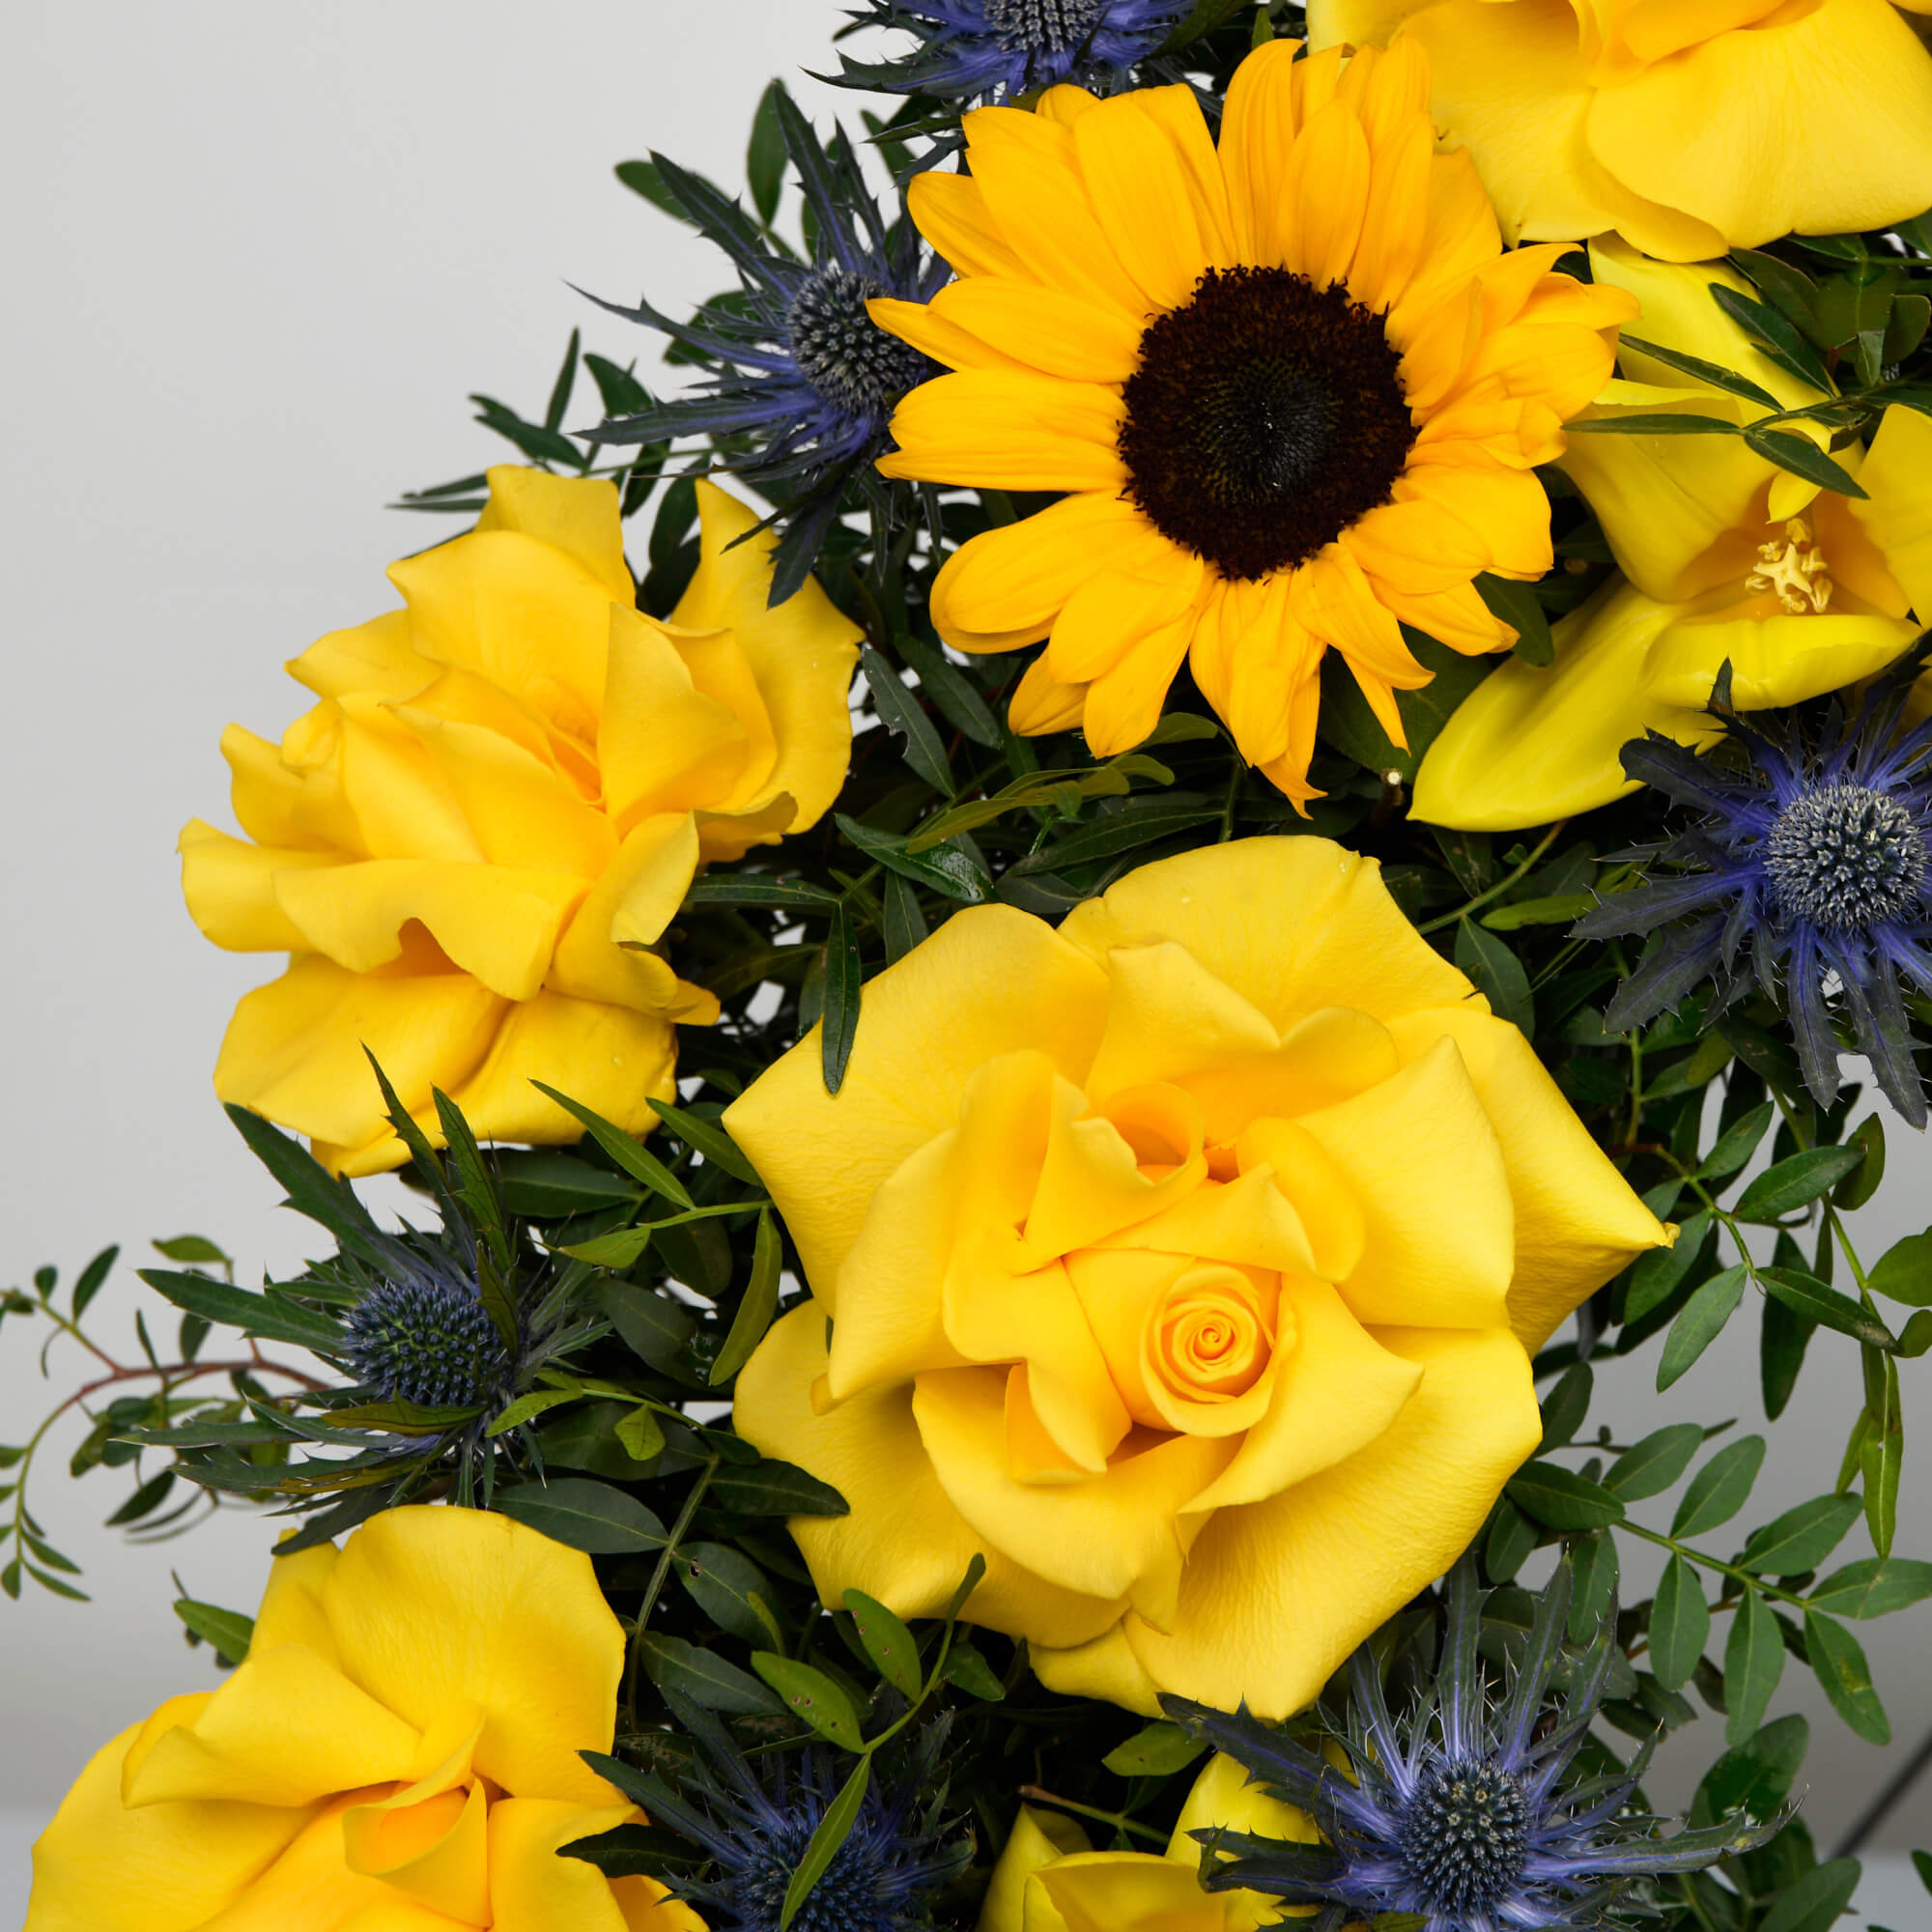 Funeral wreath with roses and sunflowers